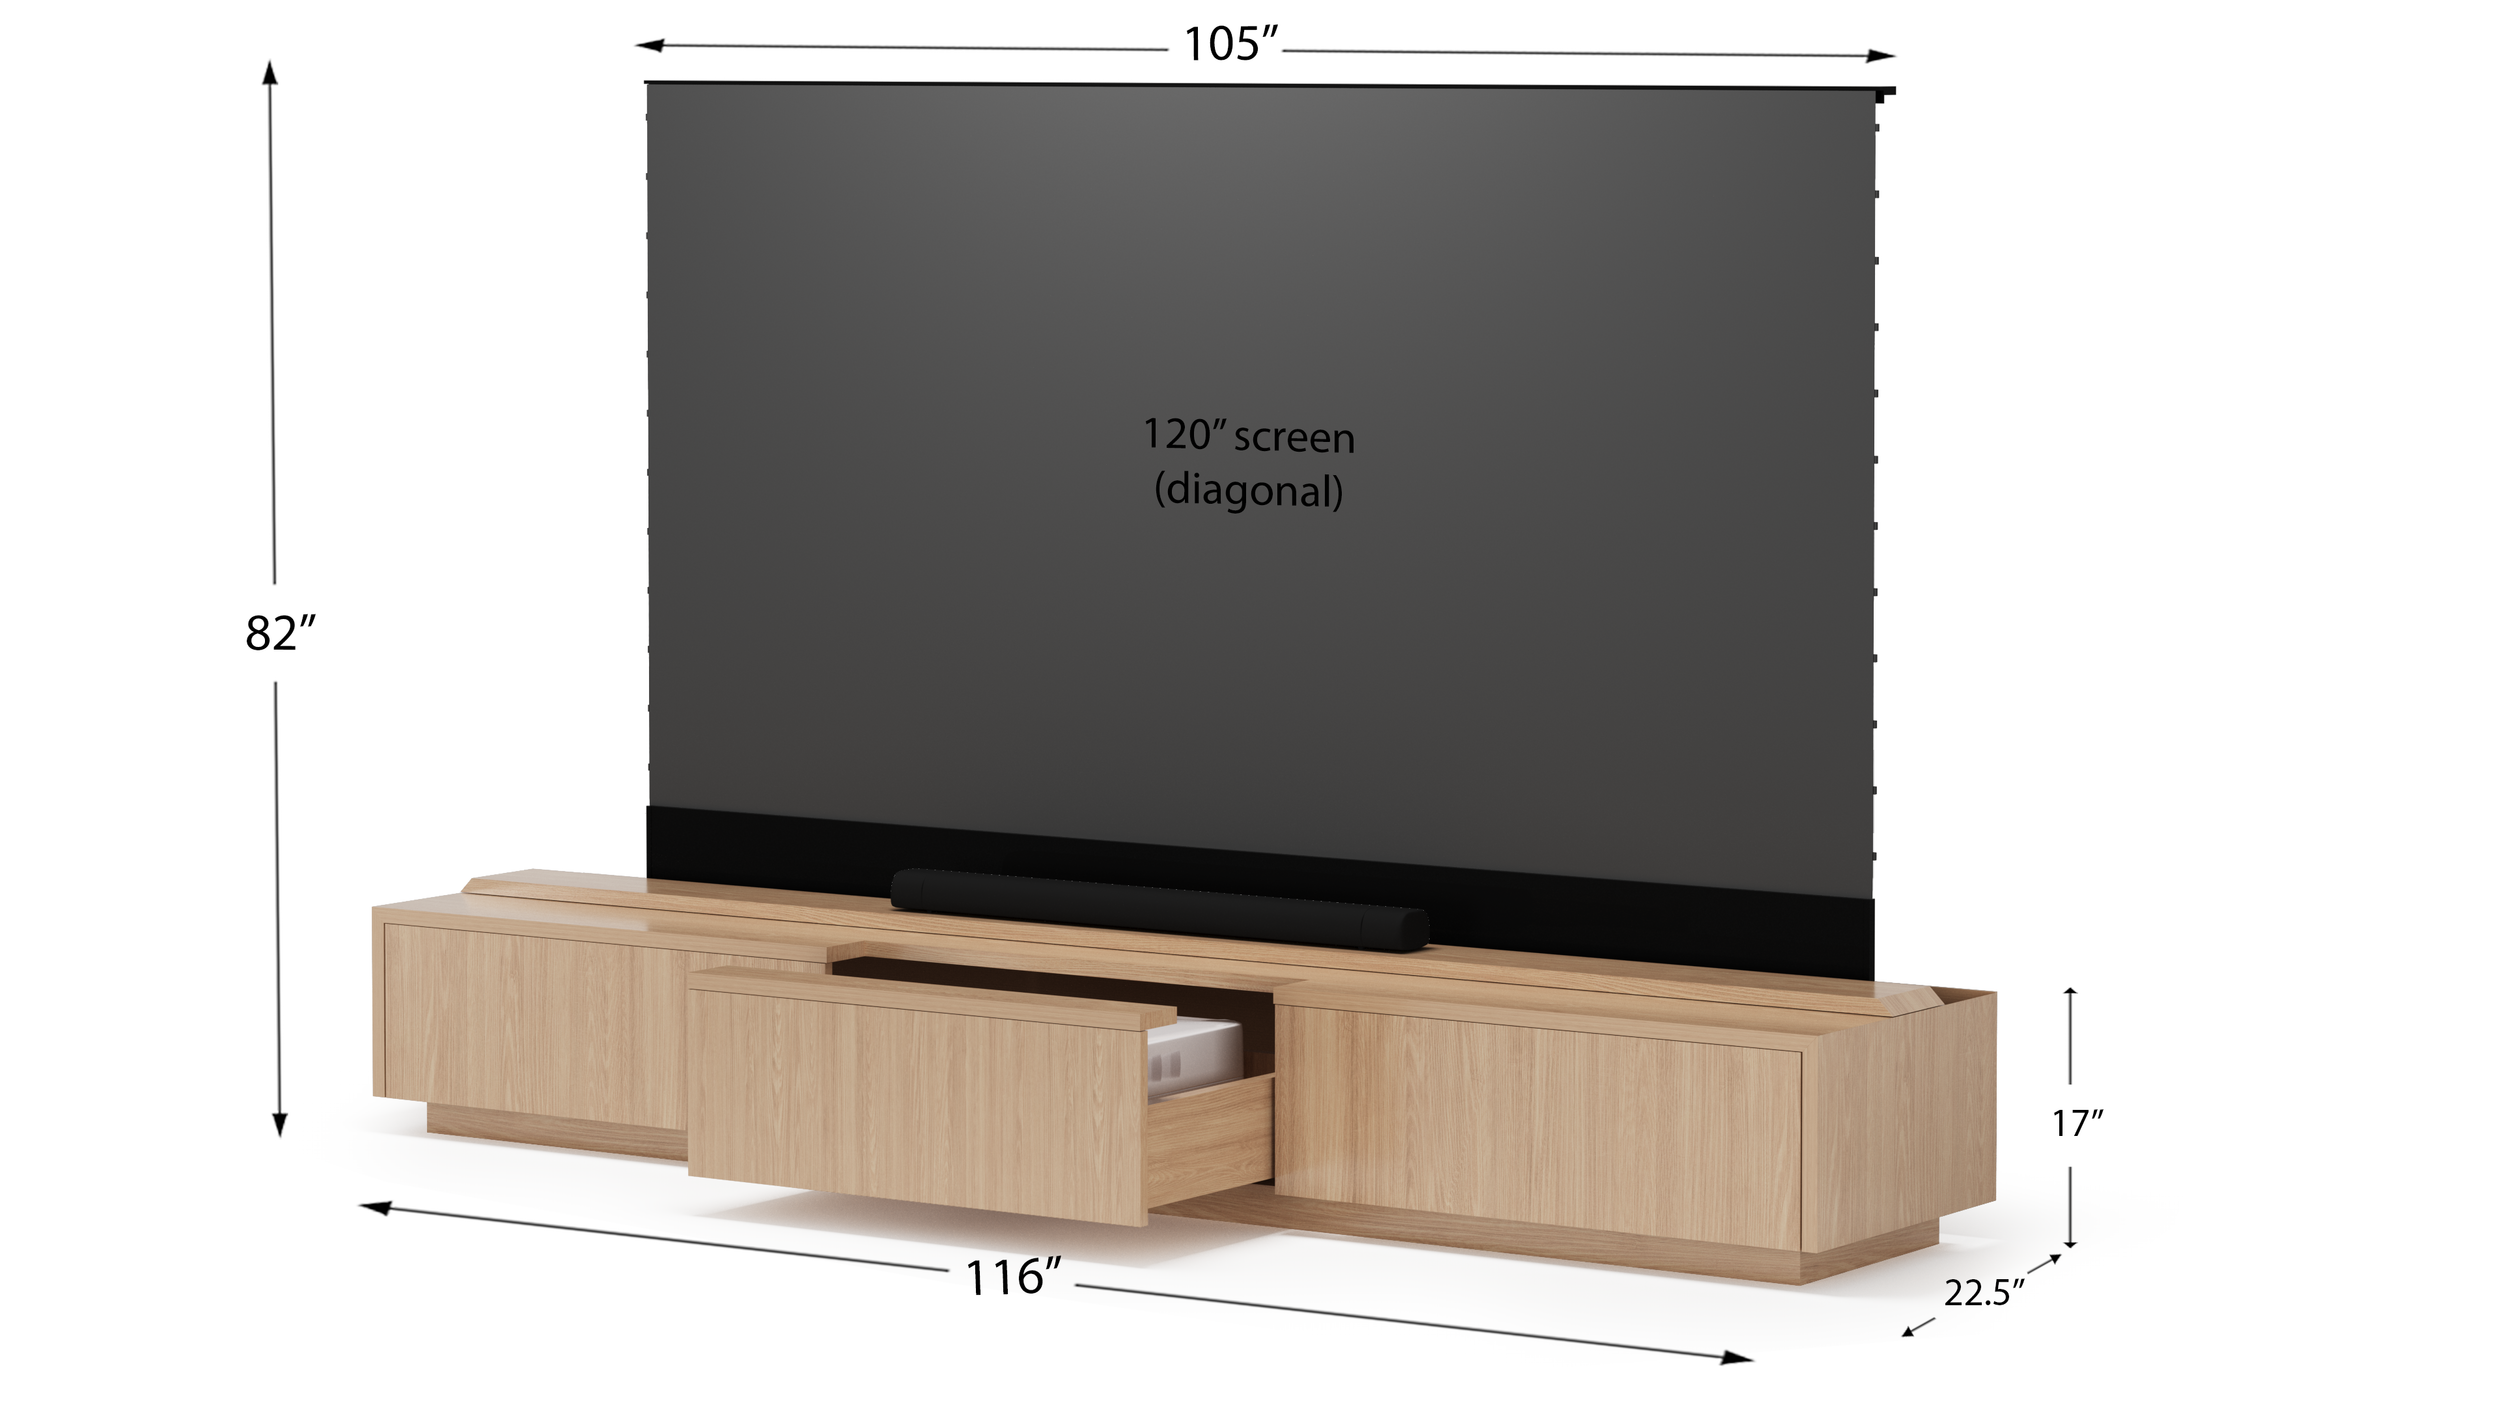 Render Dimensions 120 inch screen.png